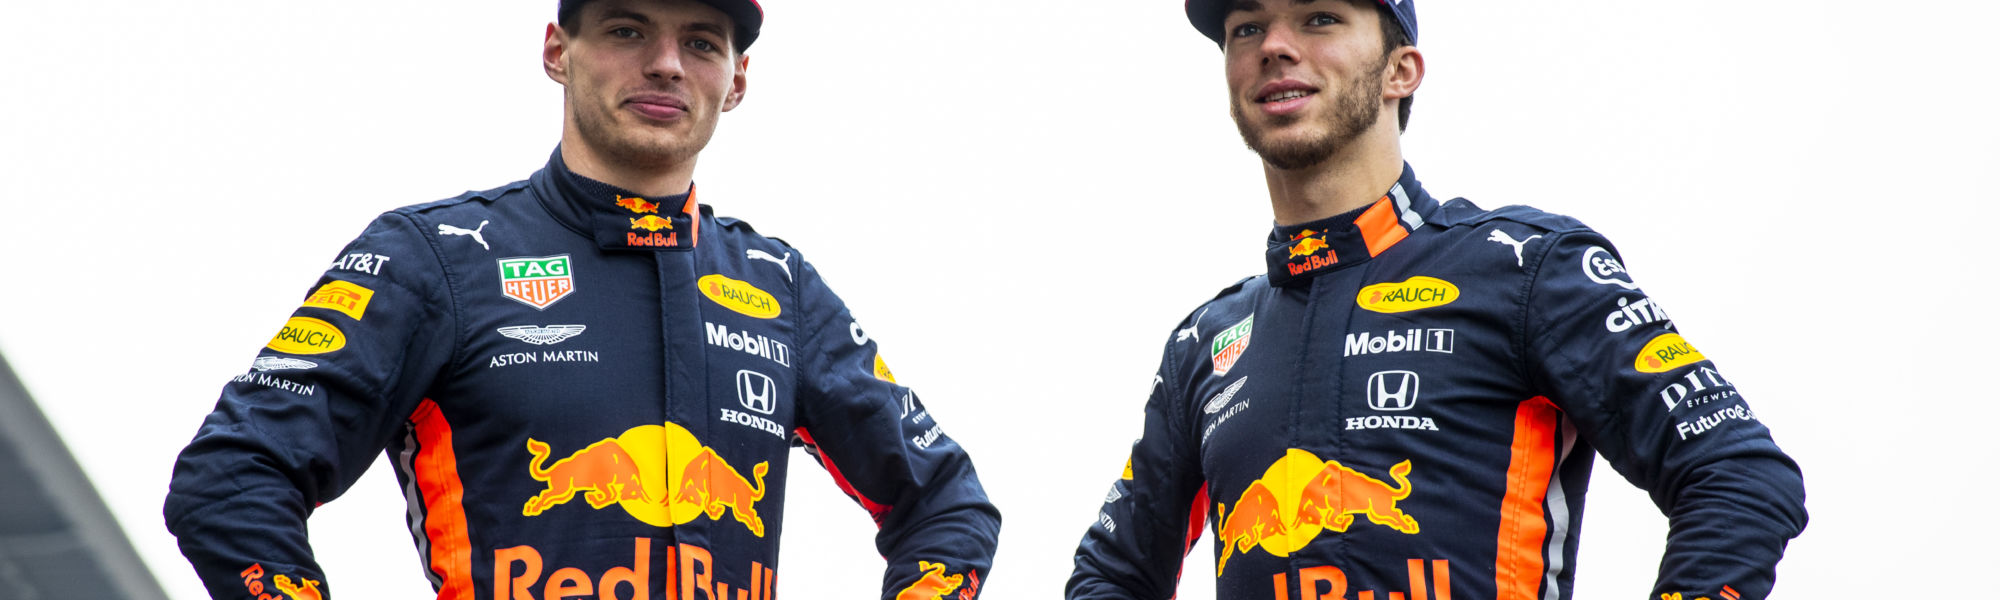 Gasly to partner Verstappen at Red Bull in 2019